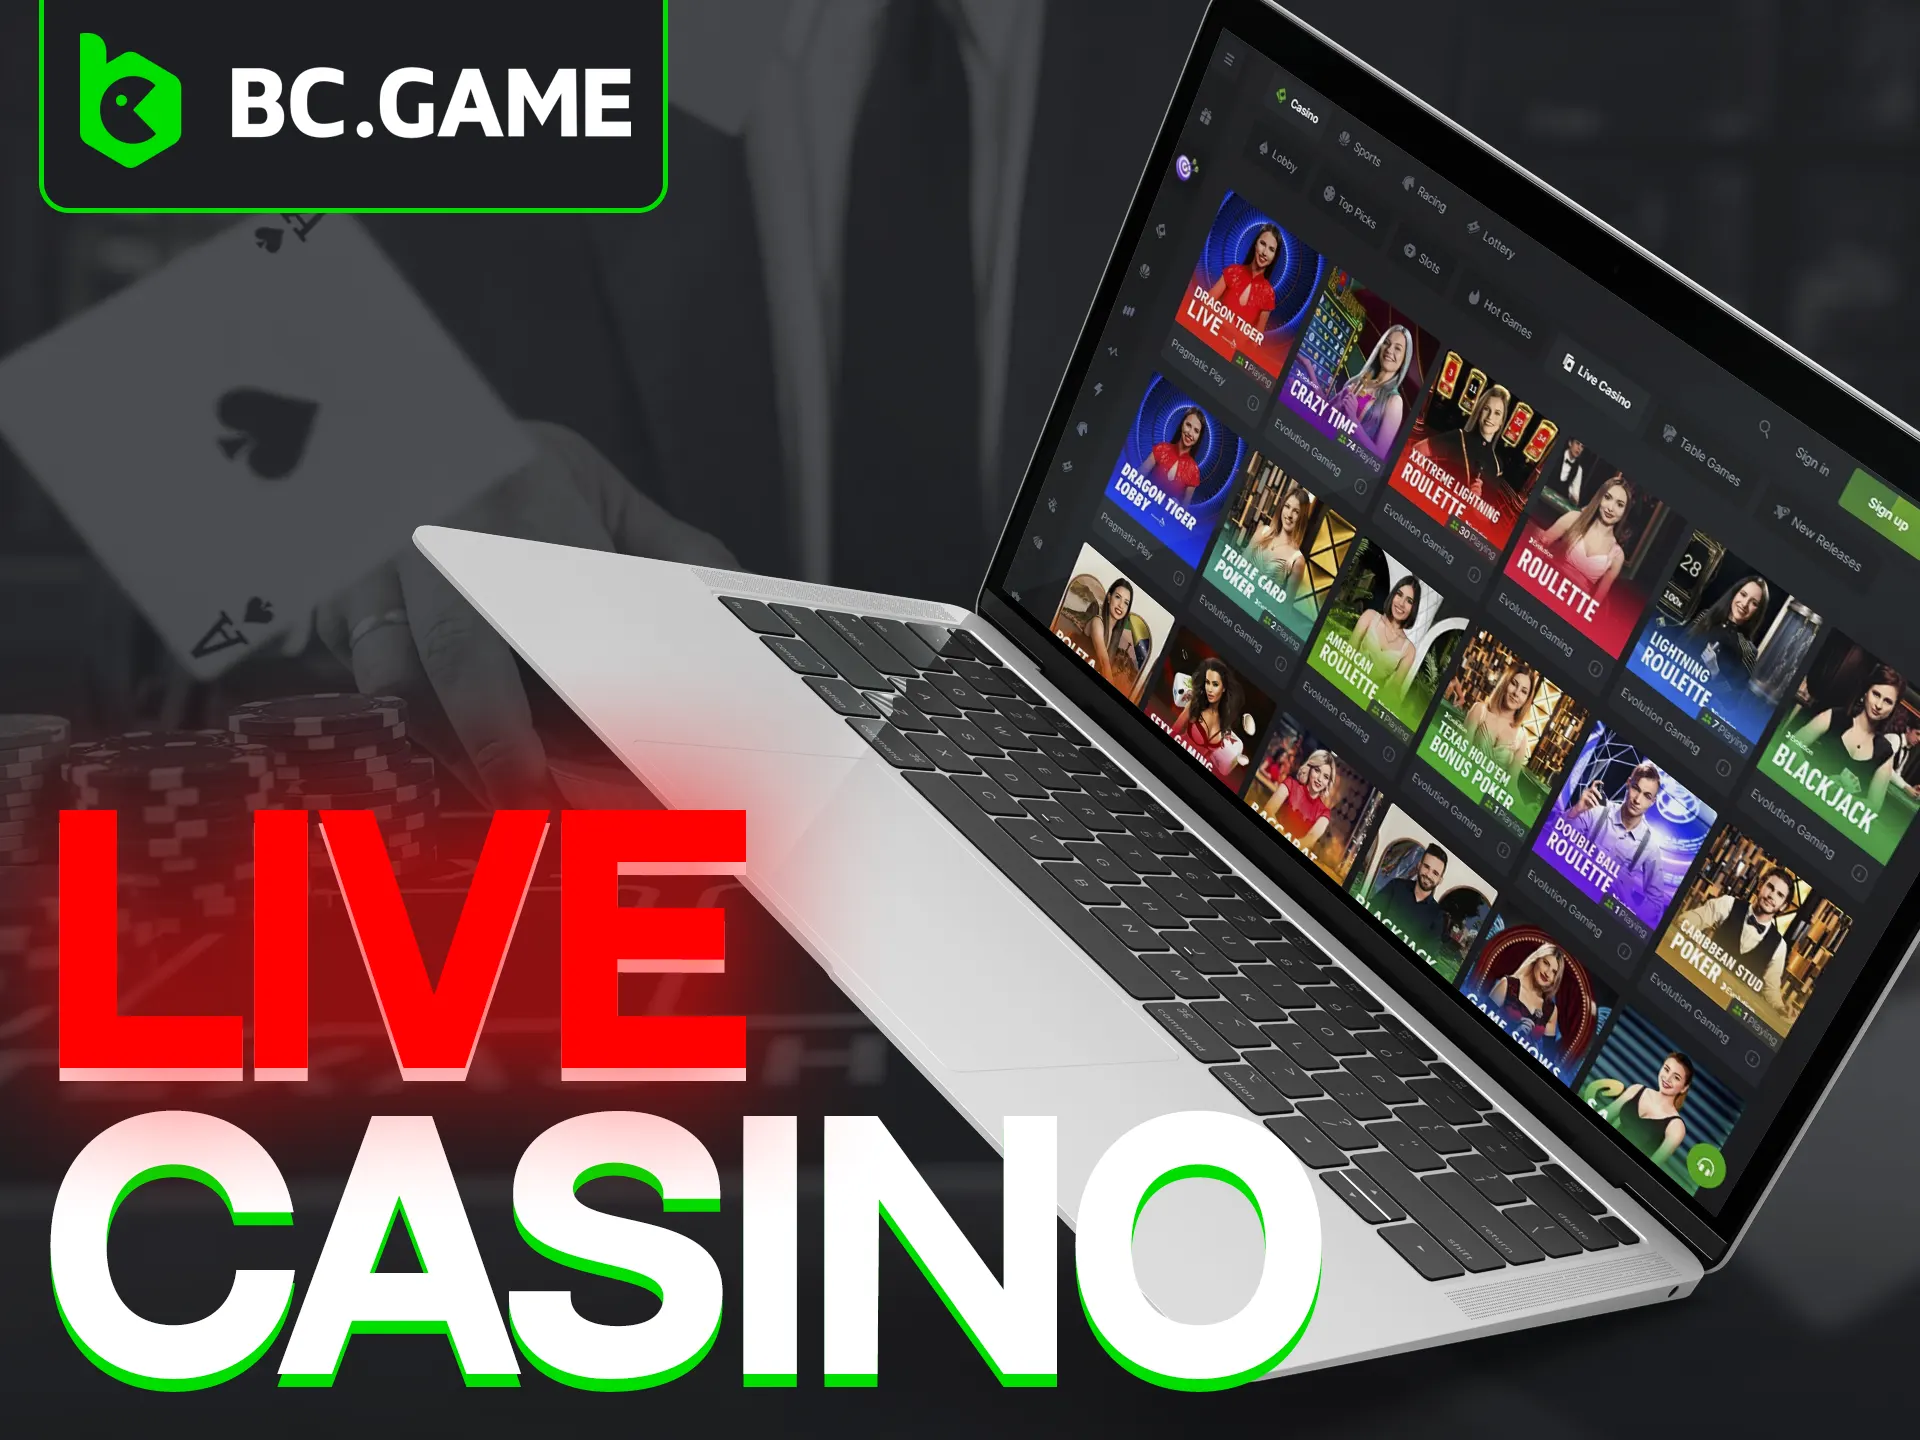 BC Game offers engaging live casino experiences.